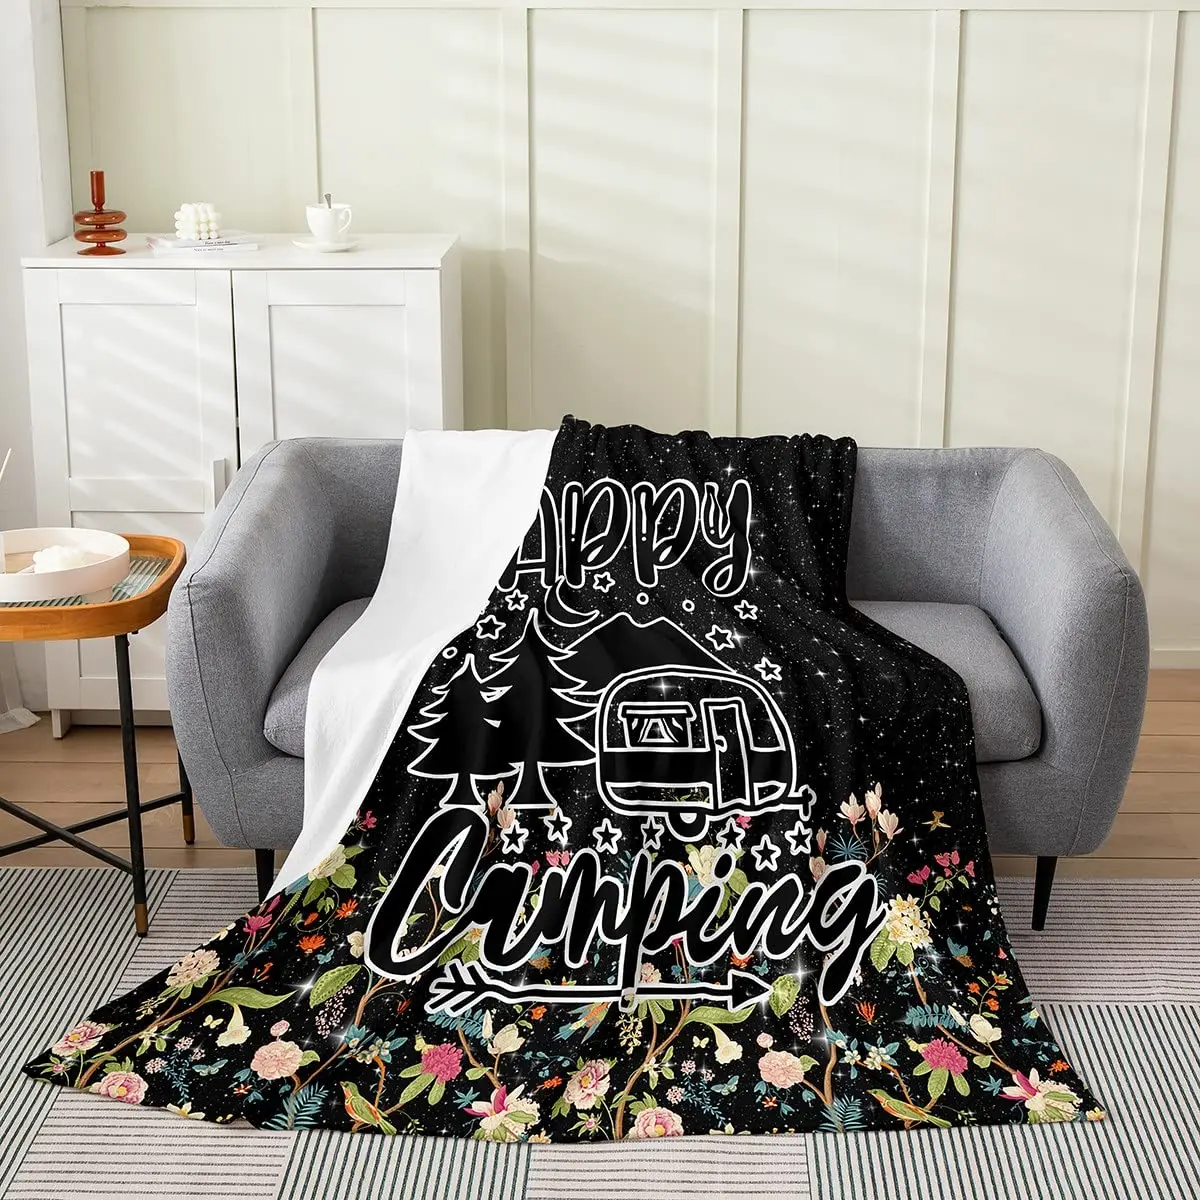 

Happy Camper Blanket Throw Flannel Blanket Super Soft Cozy Warm Gifts Blanket for Couch Chair Bed Sofa Office for Teens Camping